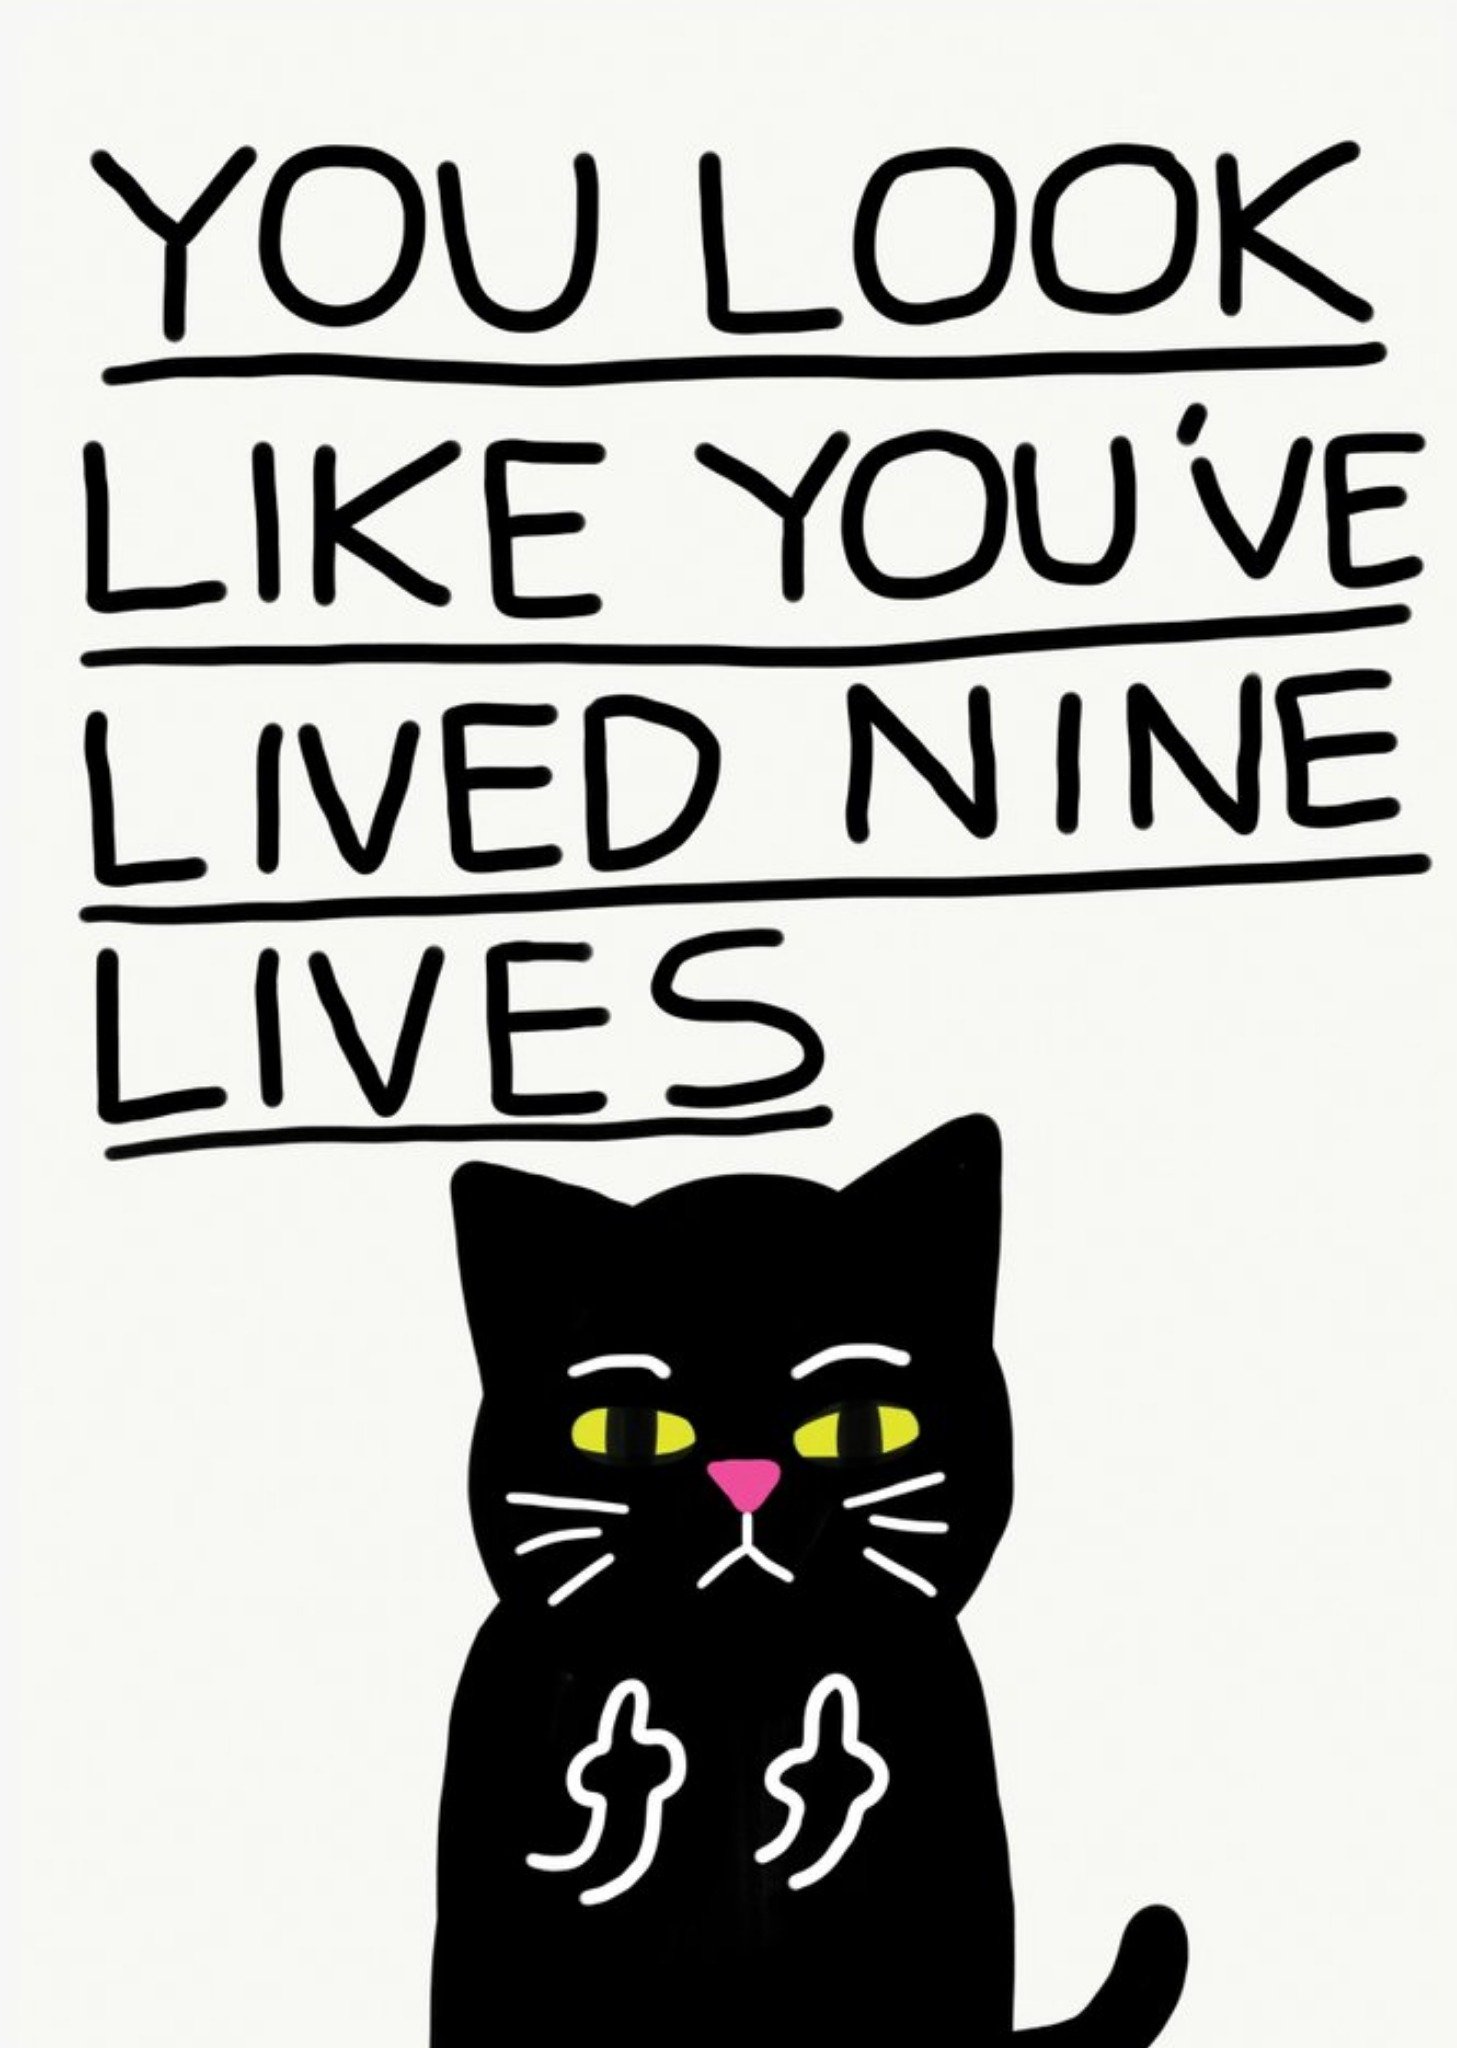 Jolly Awesome You Look Like You've Lived 9 Nine Lives Black Cat Swearing Card, Large